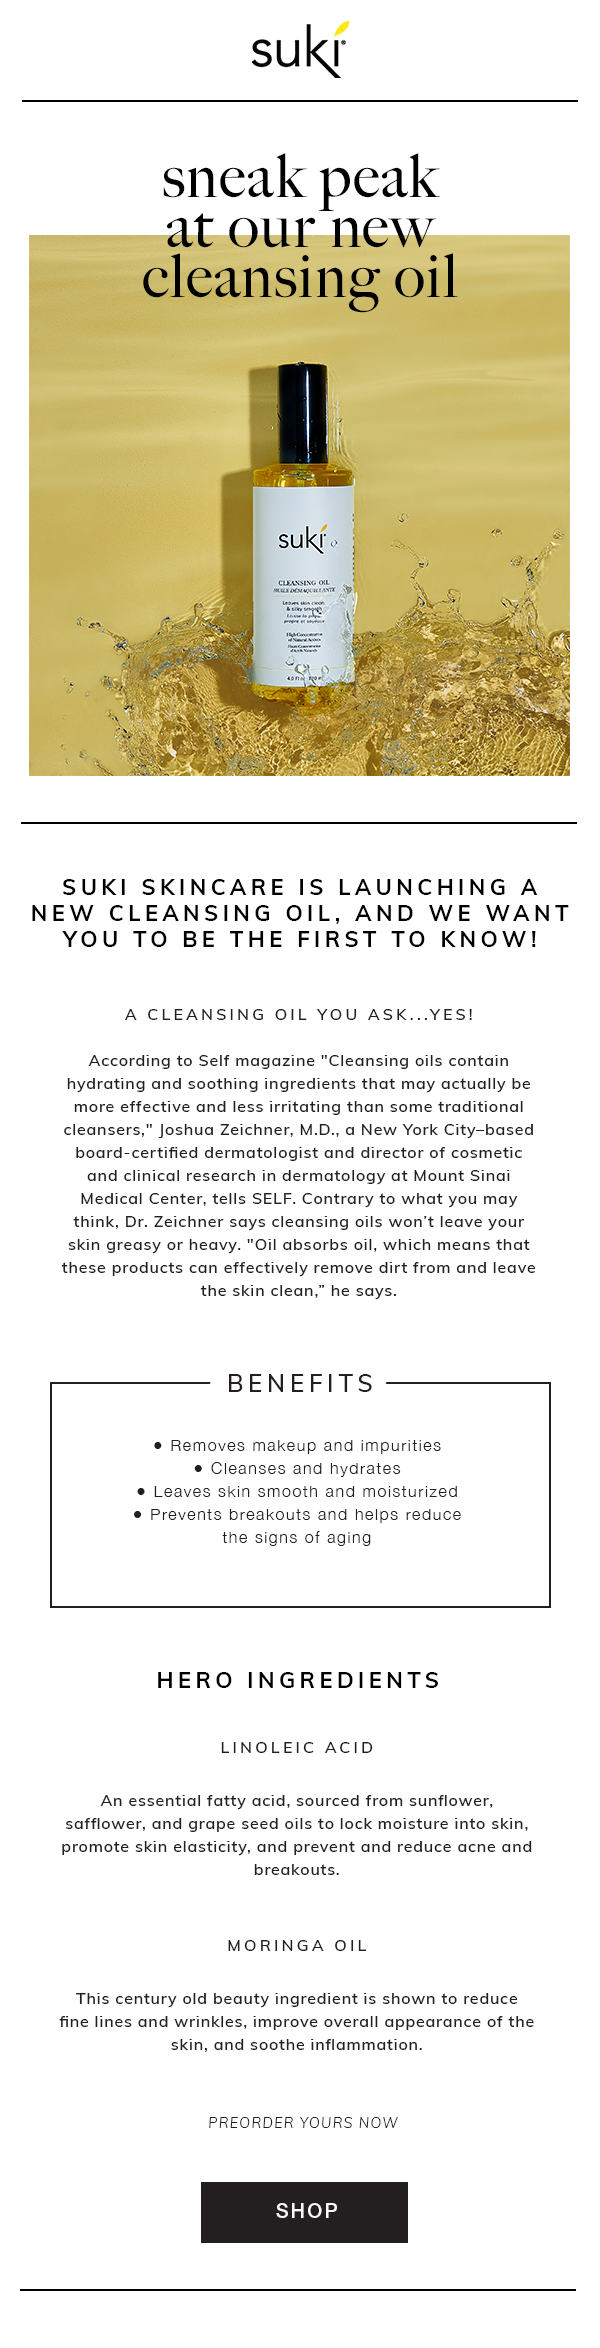 091820 - cleansing oil